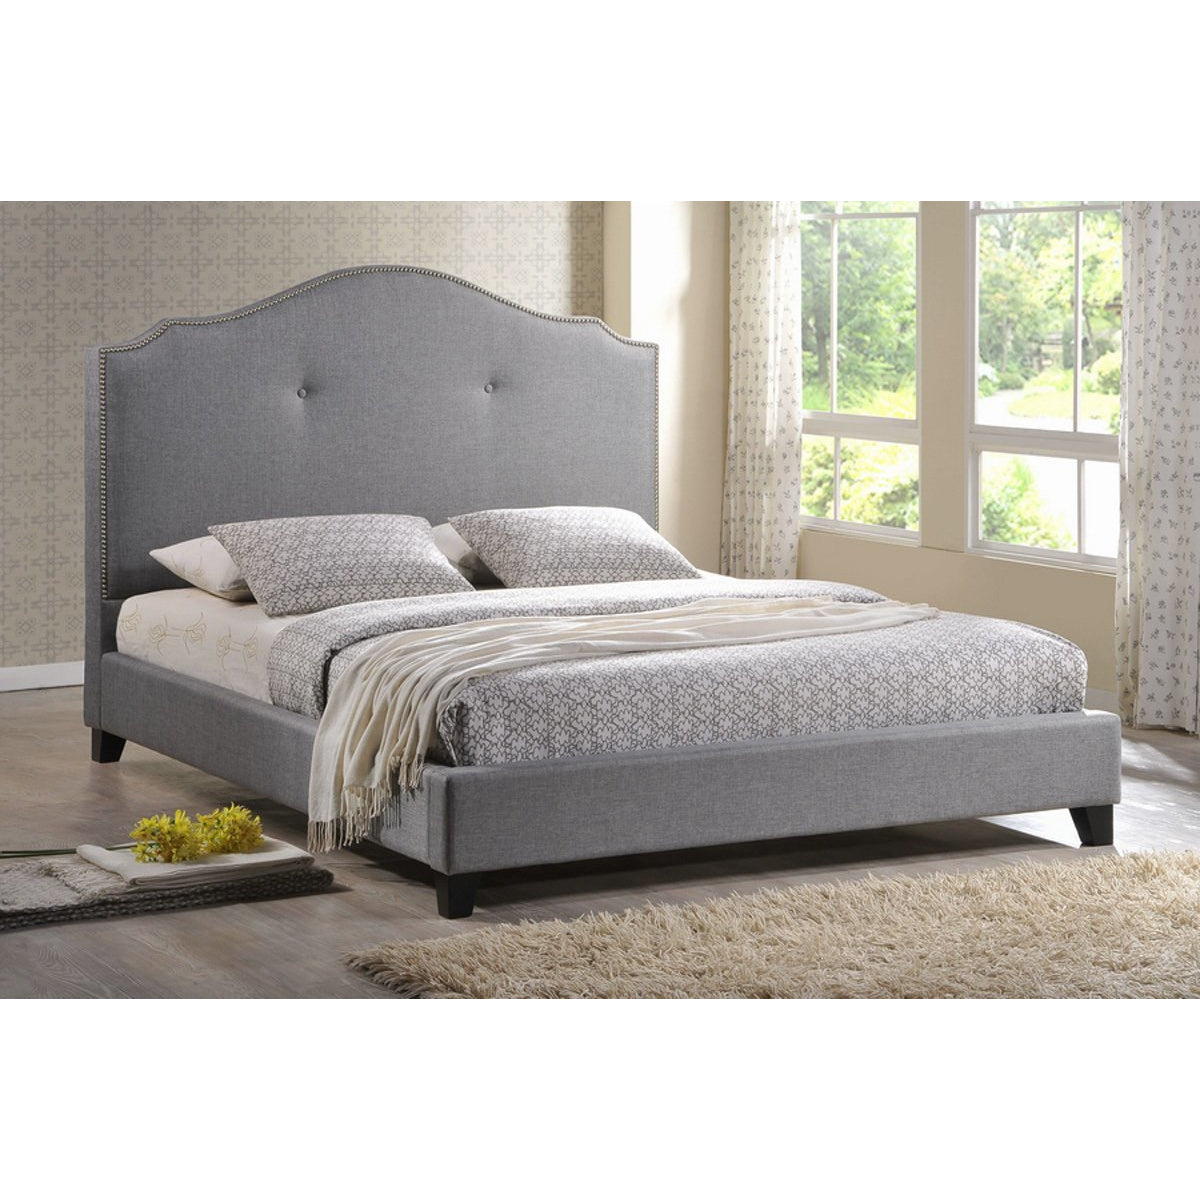 Baxton Studio Marsha Scalloped Gray Linen Modern Bed with Upholstered Headboard - Queen Size Baxton Studio-beds-Minimal And Modern - 1